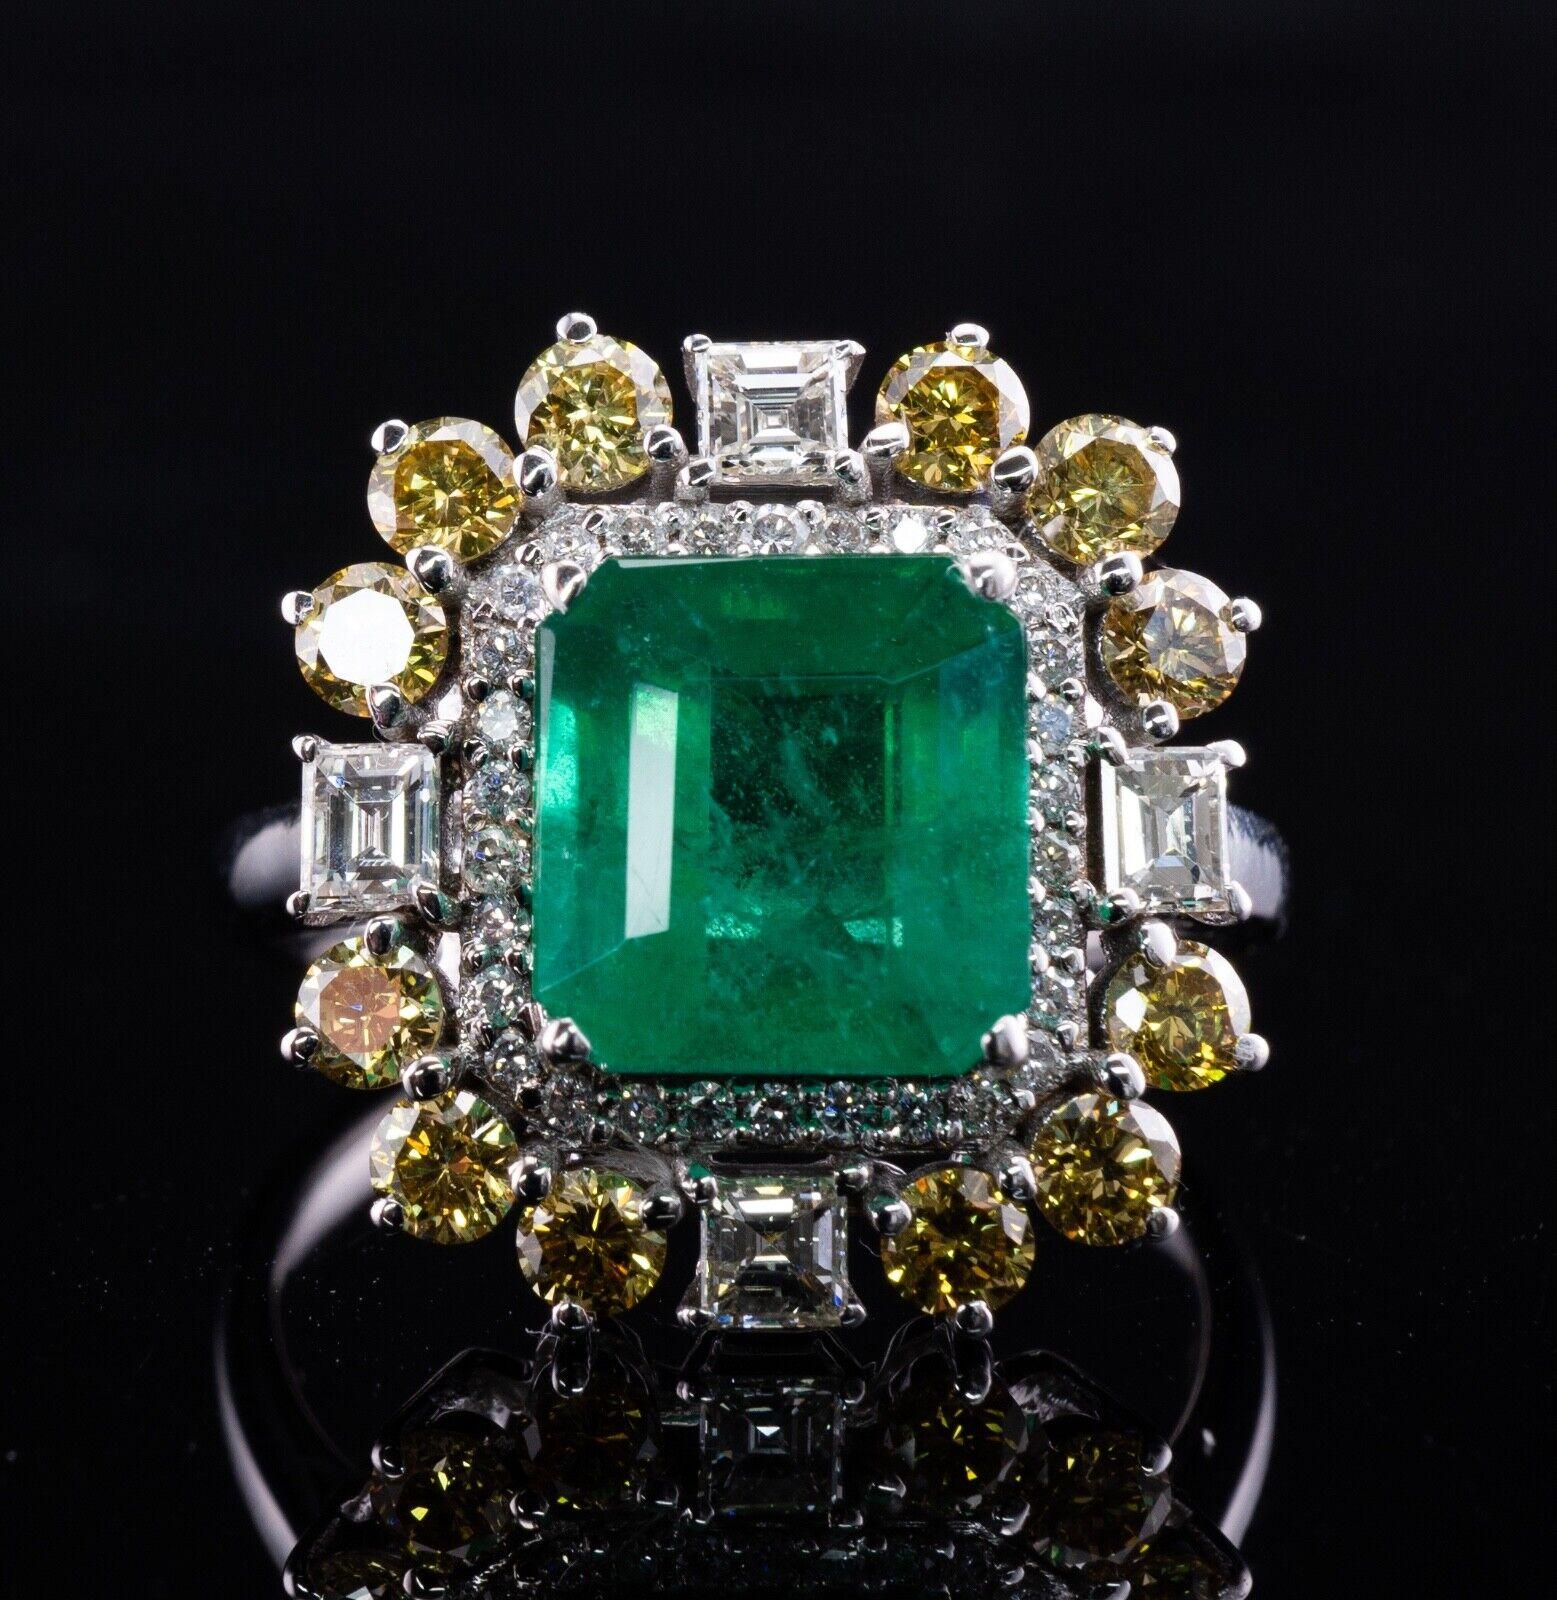 This stunning estate ring is crafted in solid 18K White Gold
The center natural Earth mined Zambian Emerald measures 9x8.5mm (appr. 3.10 carats by calculation).
This is a gorgeous vivid color stone.
It is accented with 30 round brilliant cut